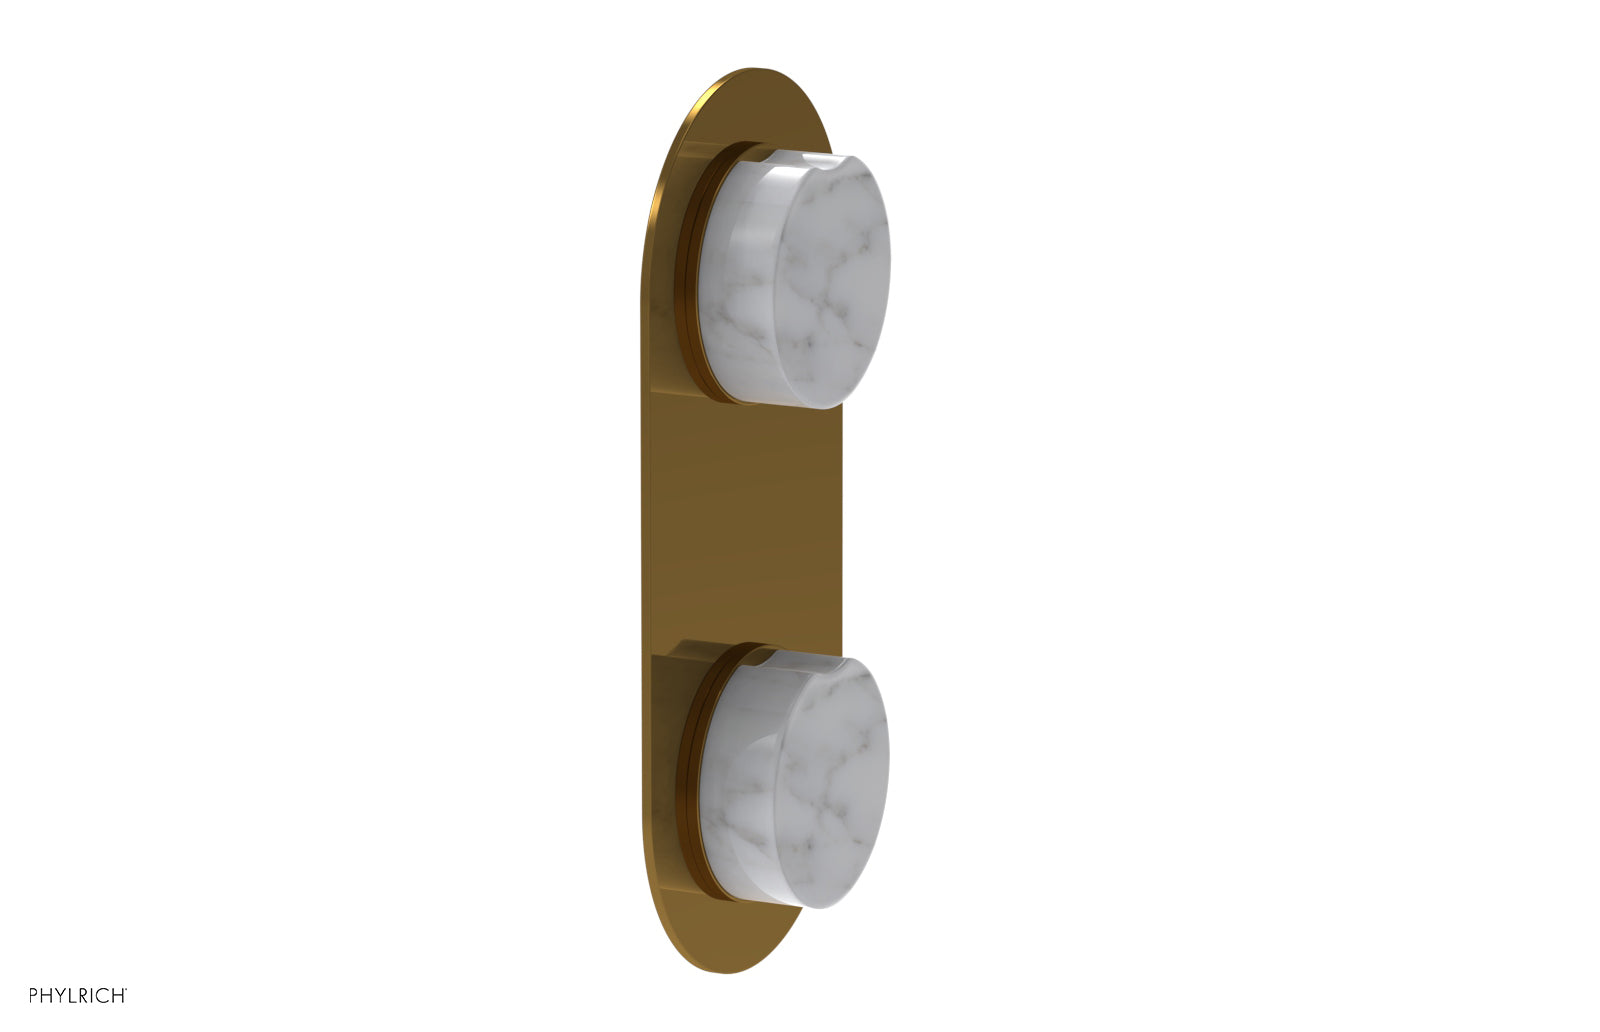 Phylrich CIRC Thermostatic Valve with Volume Control or Diverter - White Marble Handle